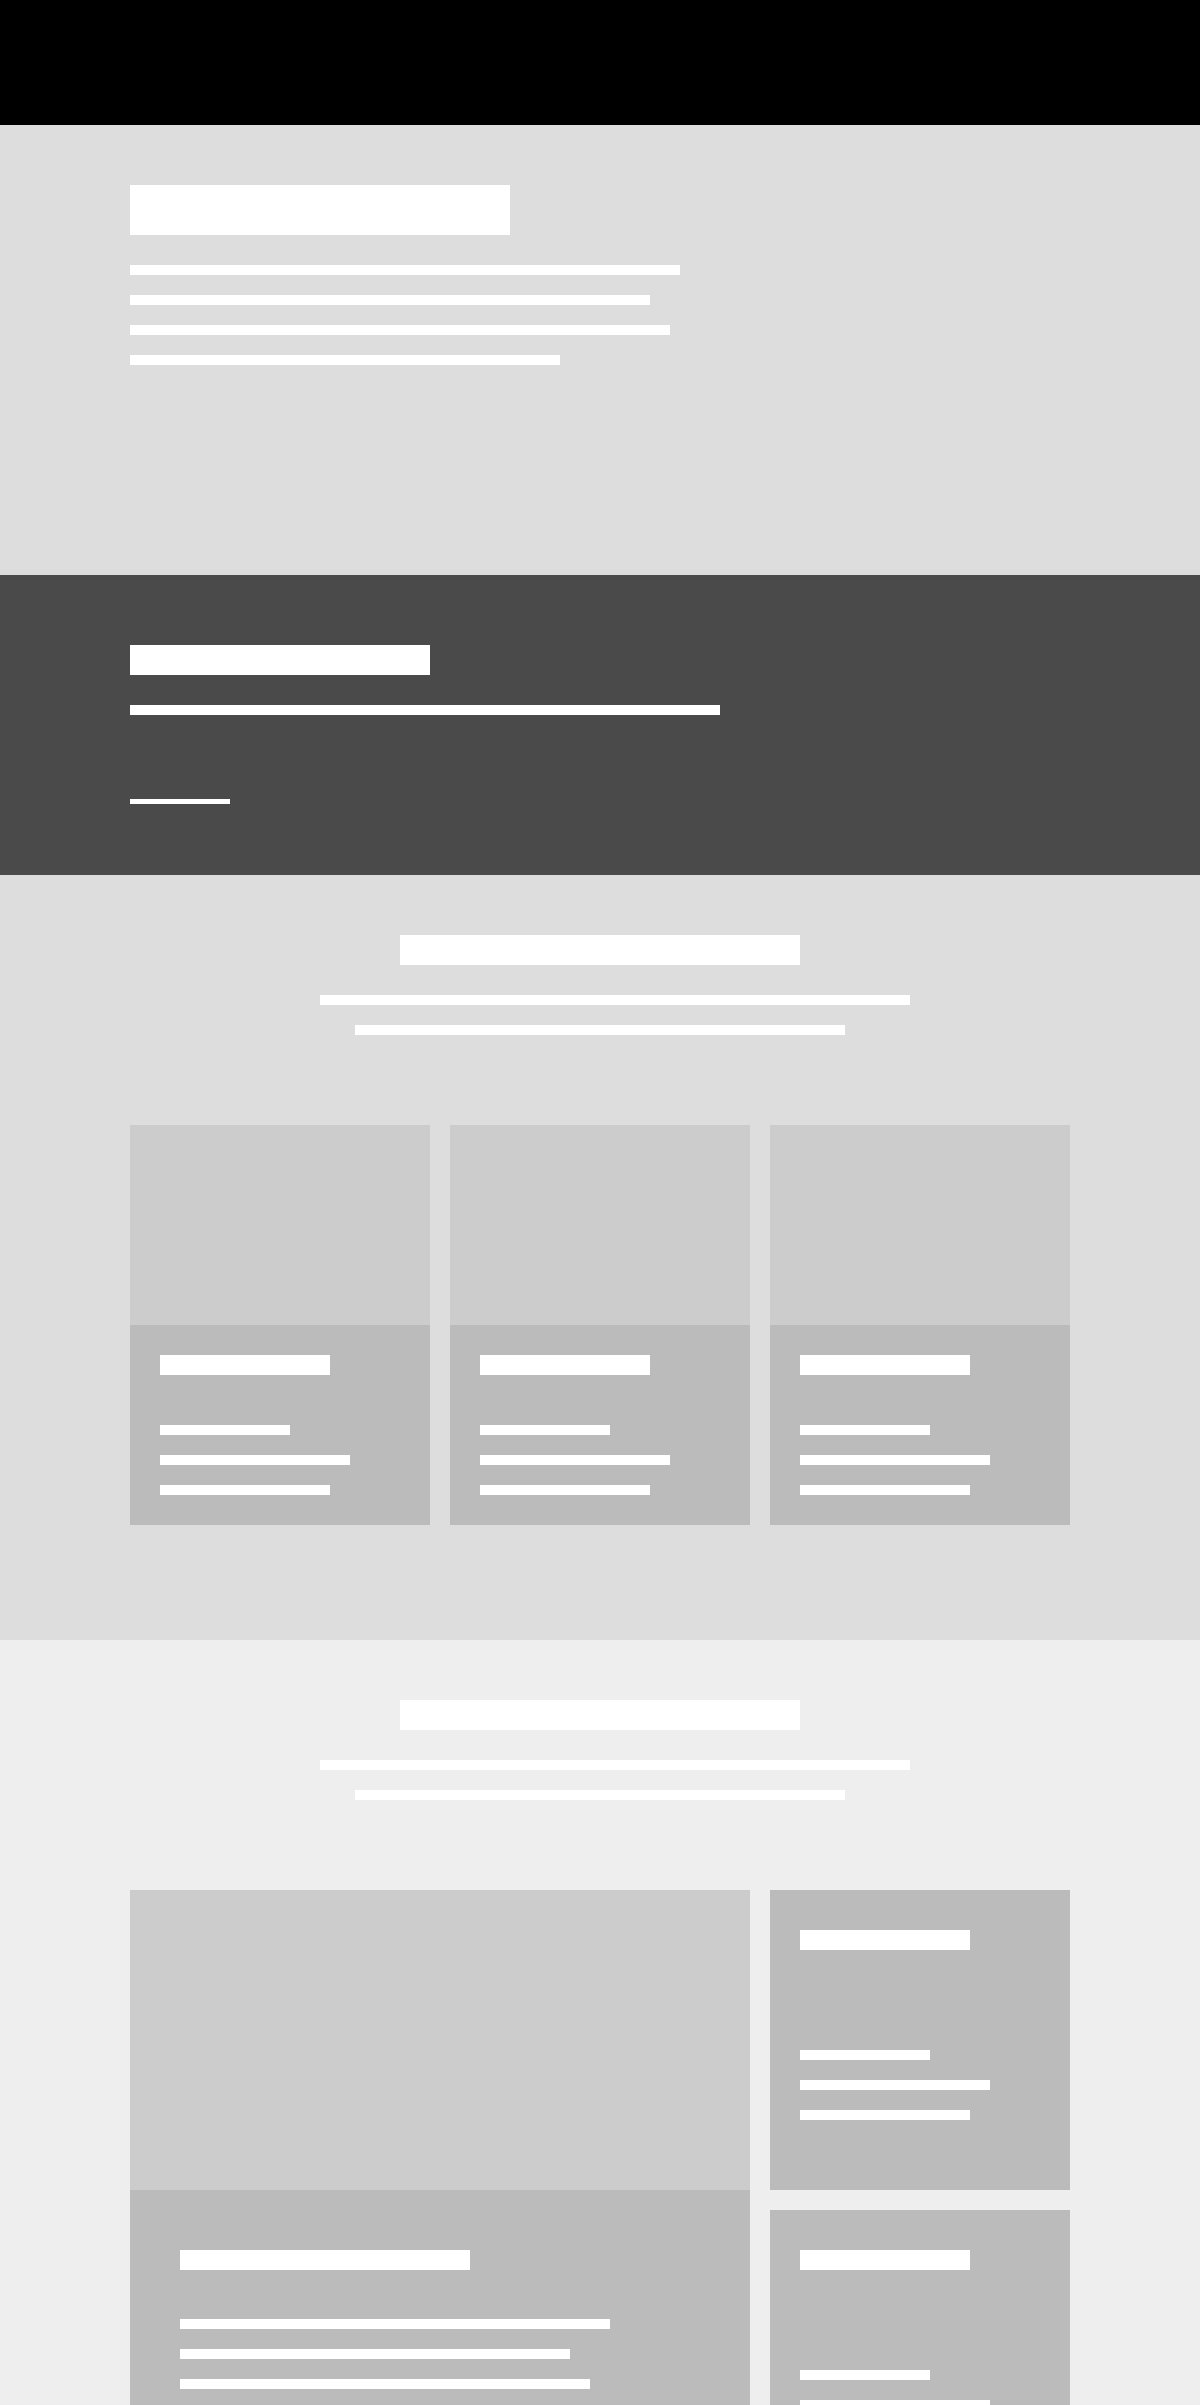 representation of a page archetype featuring a landing page